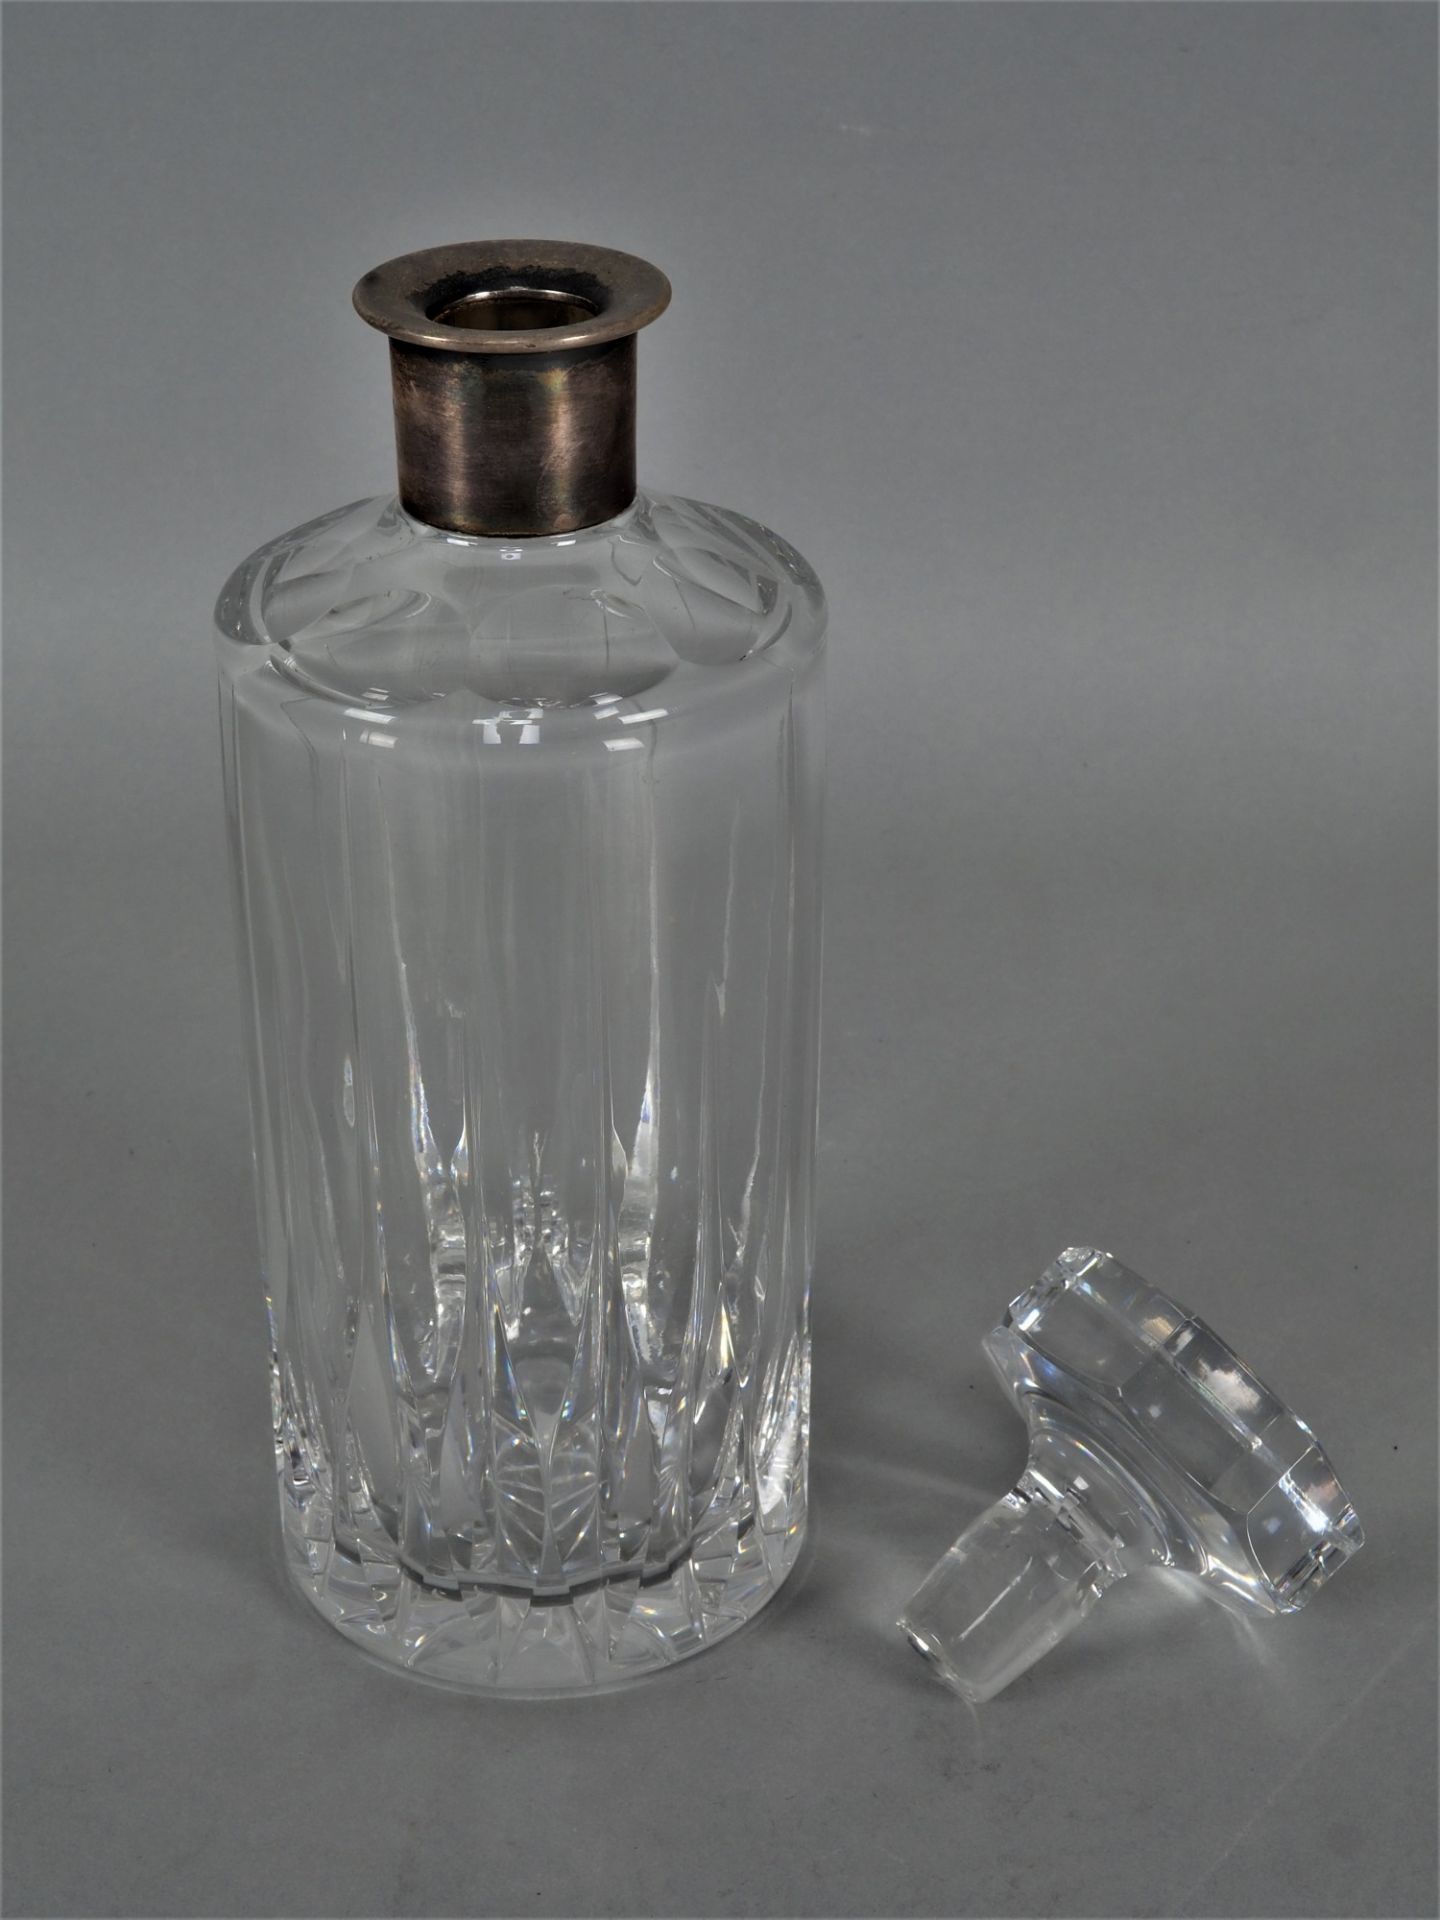 Heavy carafe with silver spout - Image 2 of 4